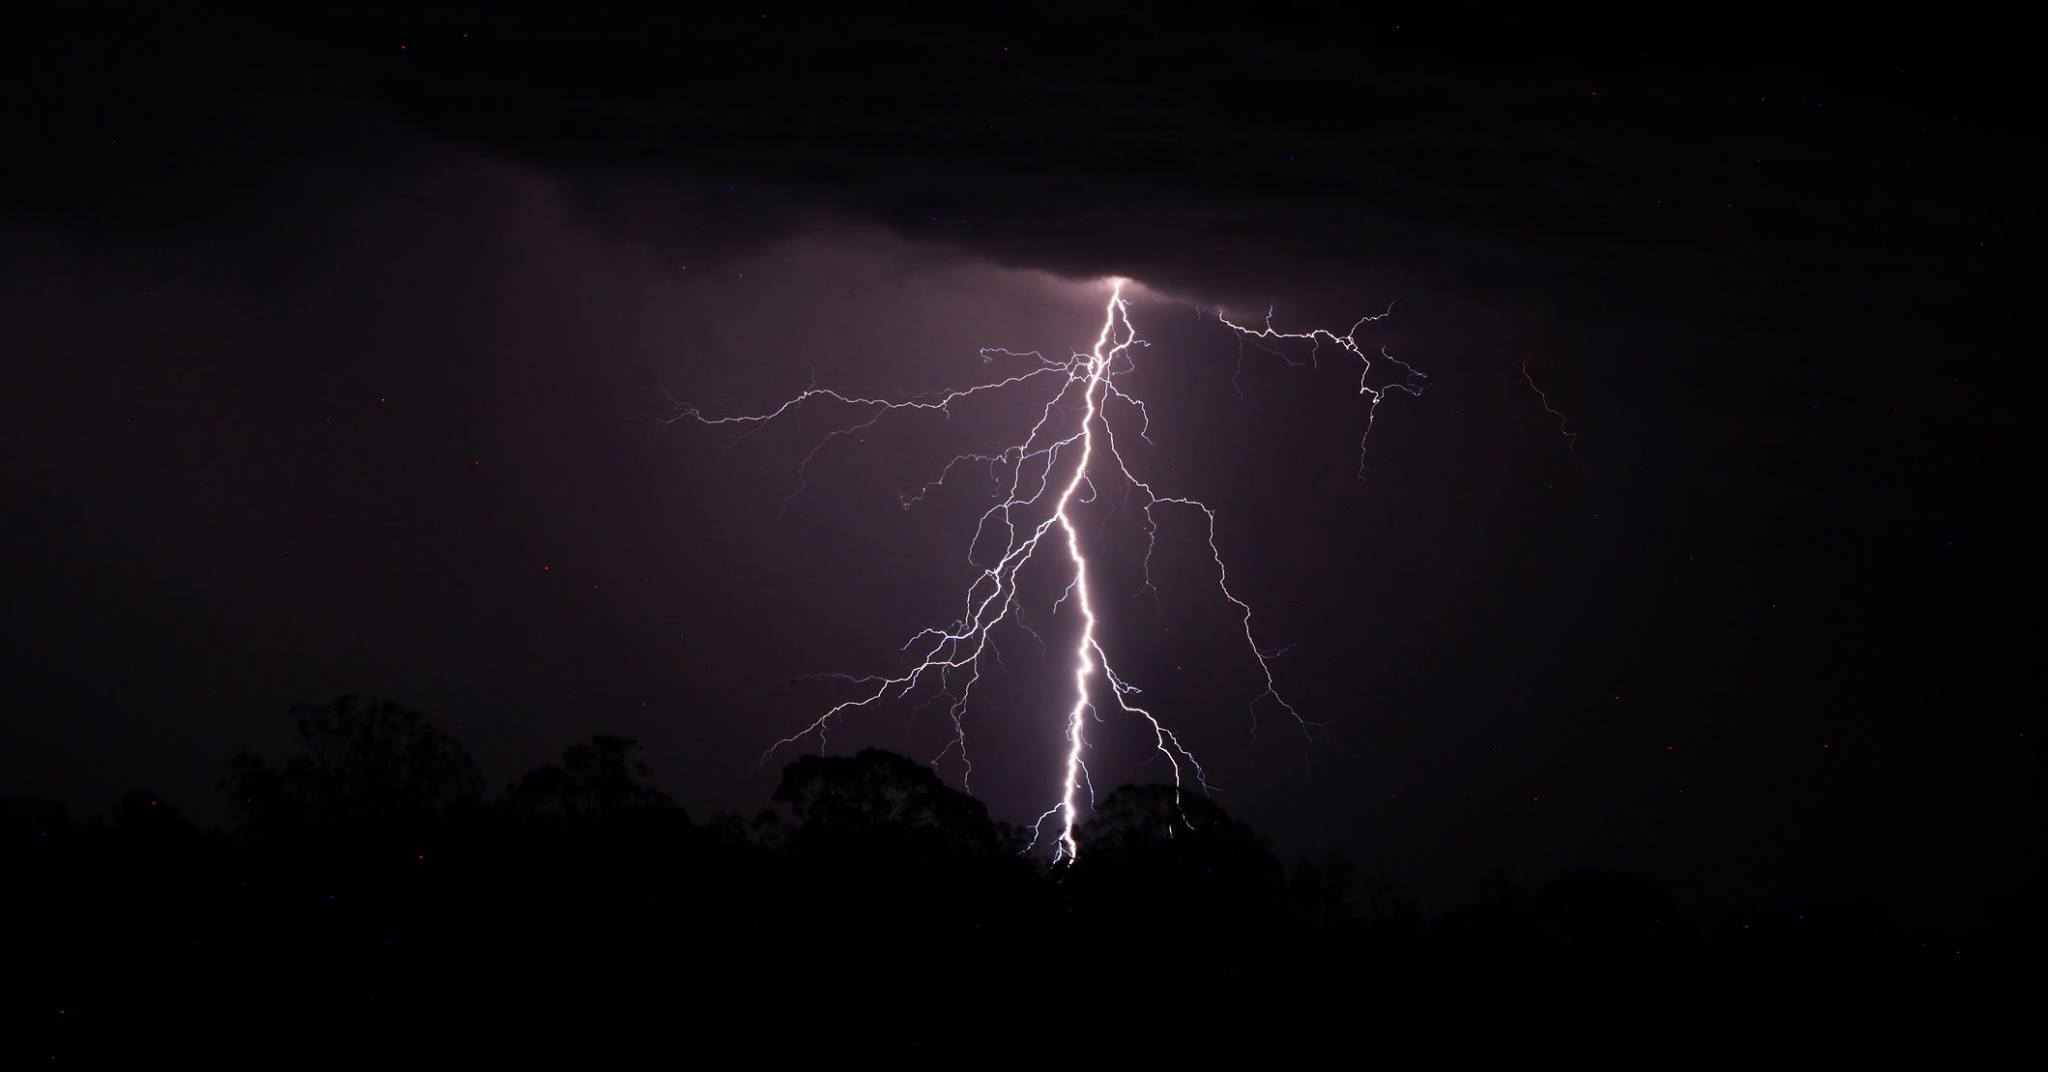 Storms and Lightning Warwick Queensland 21st December 2016 - Extreme Storms